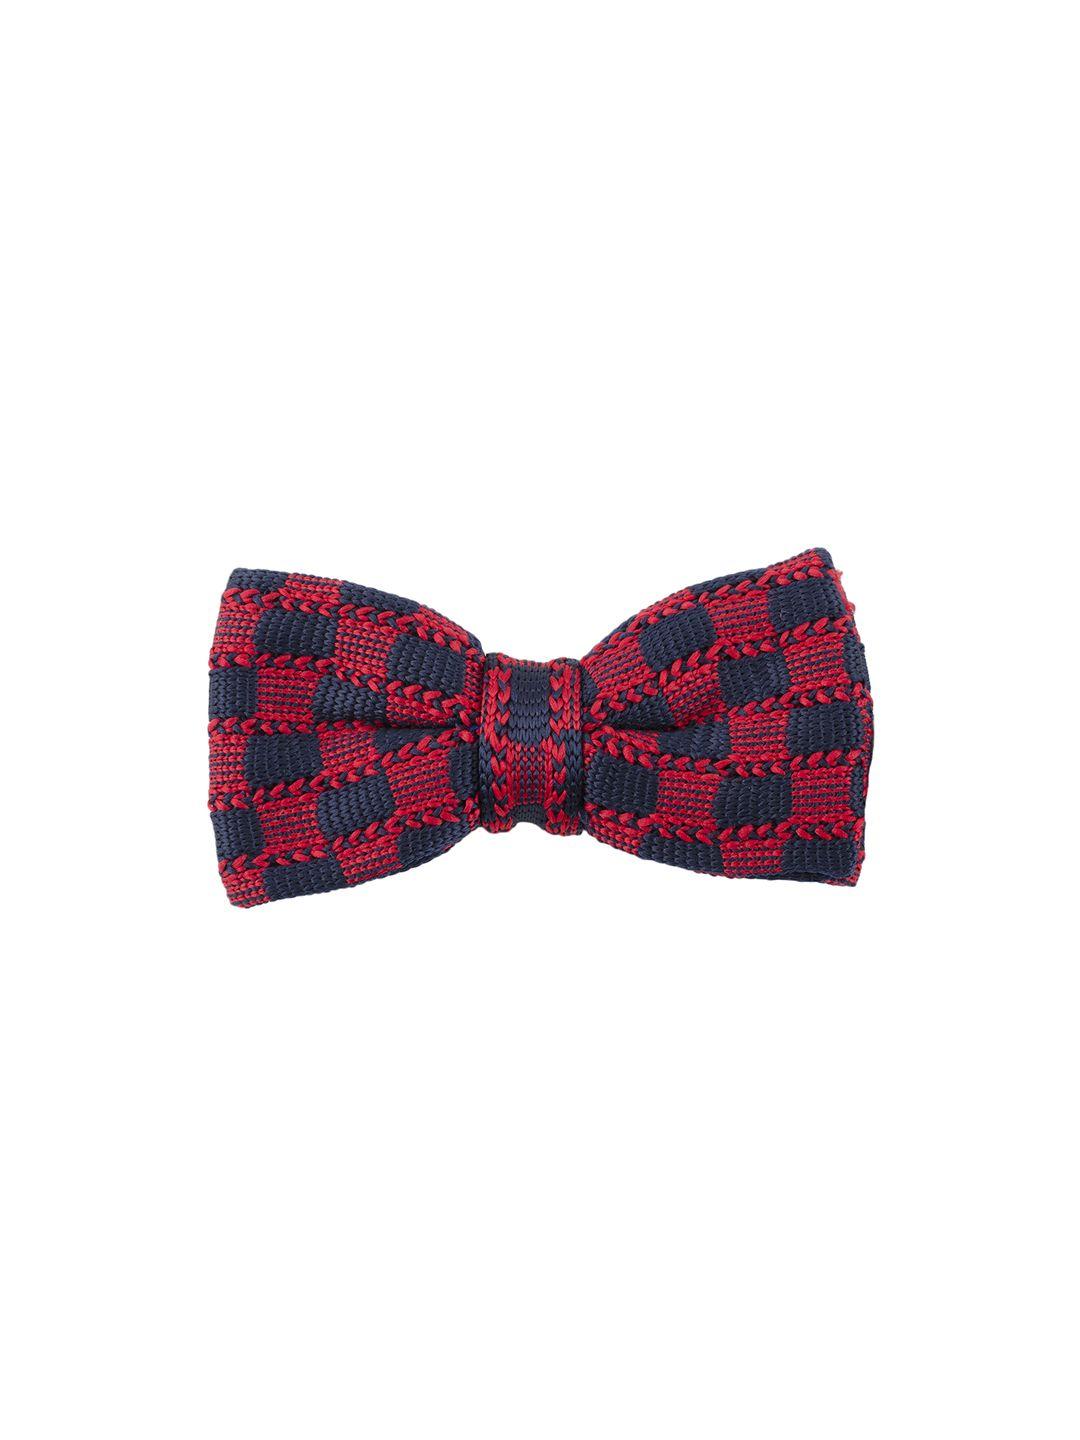 tossido navy blue & red woven design bow tie